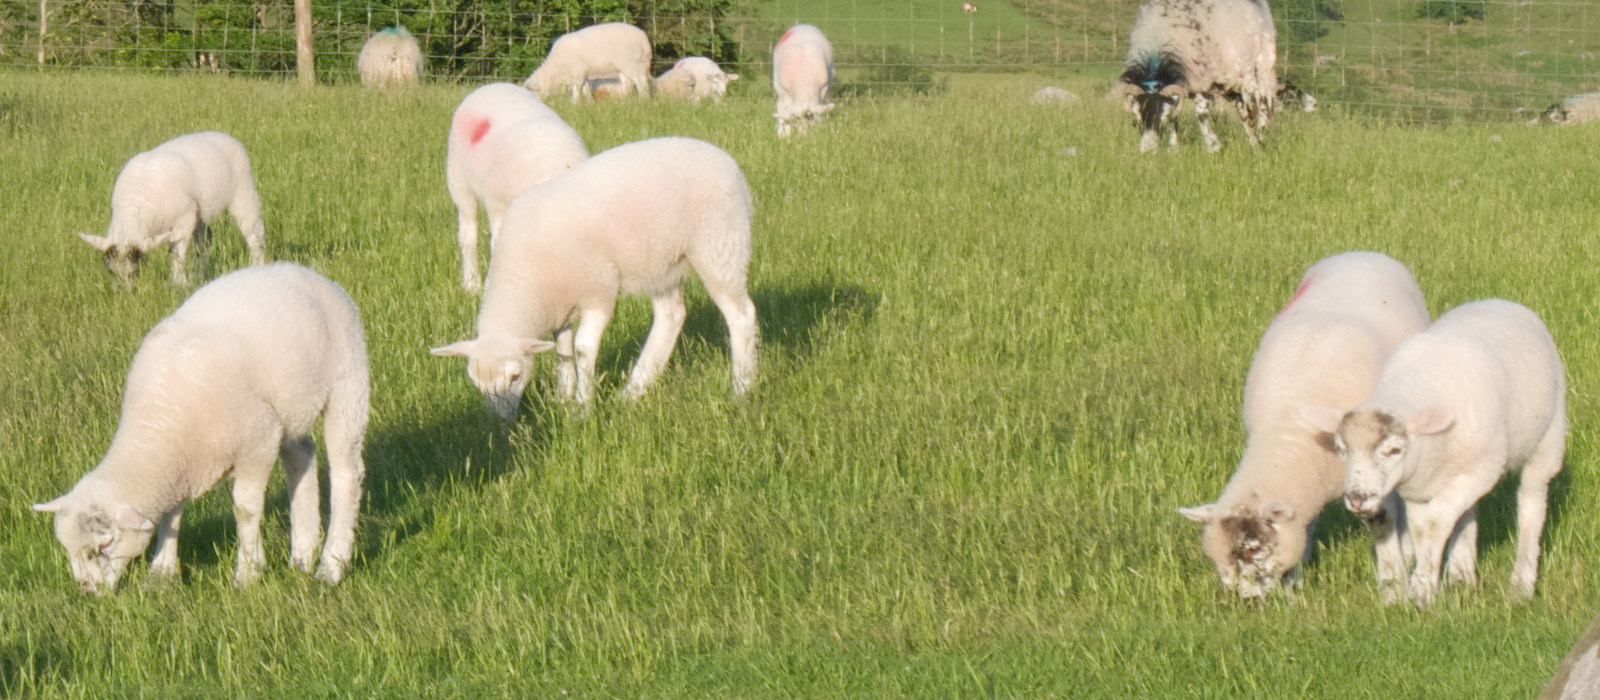 Several white lambs grazing on green grass. One of them is looking up at the camera.